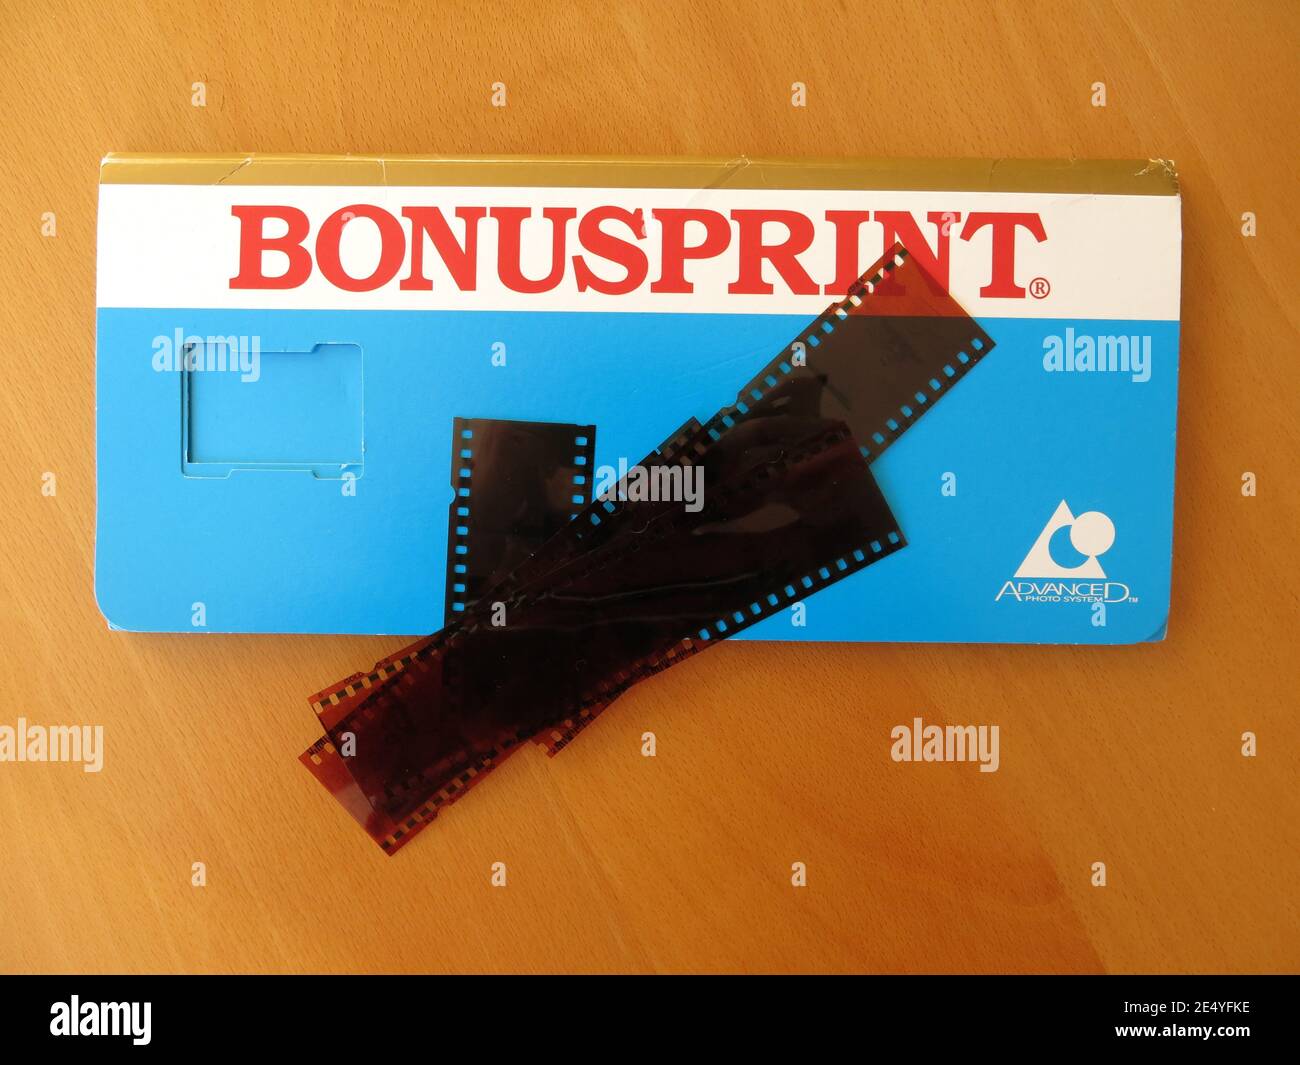 The typical blue wallet from Bonusprint to return customers' negatives and printed photos; extra long for the panoramic prints from an APS camera. Stock Photo